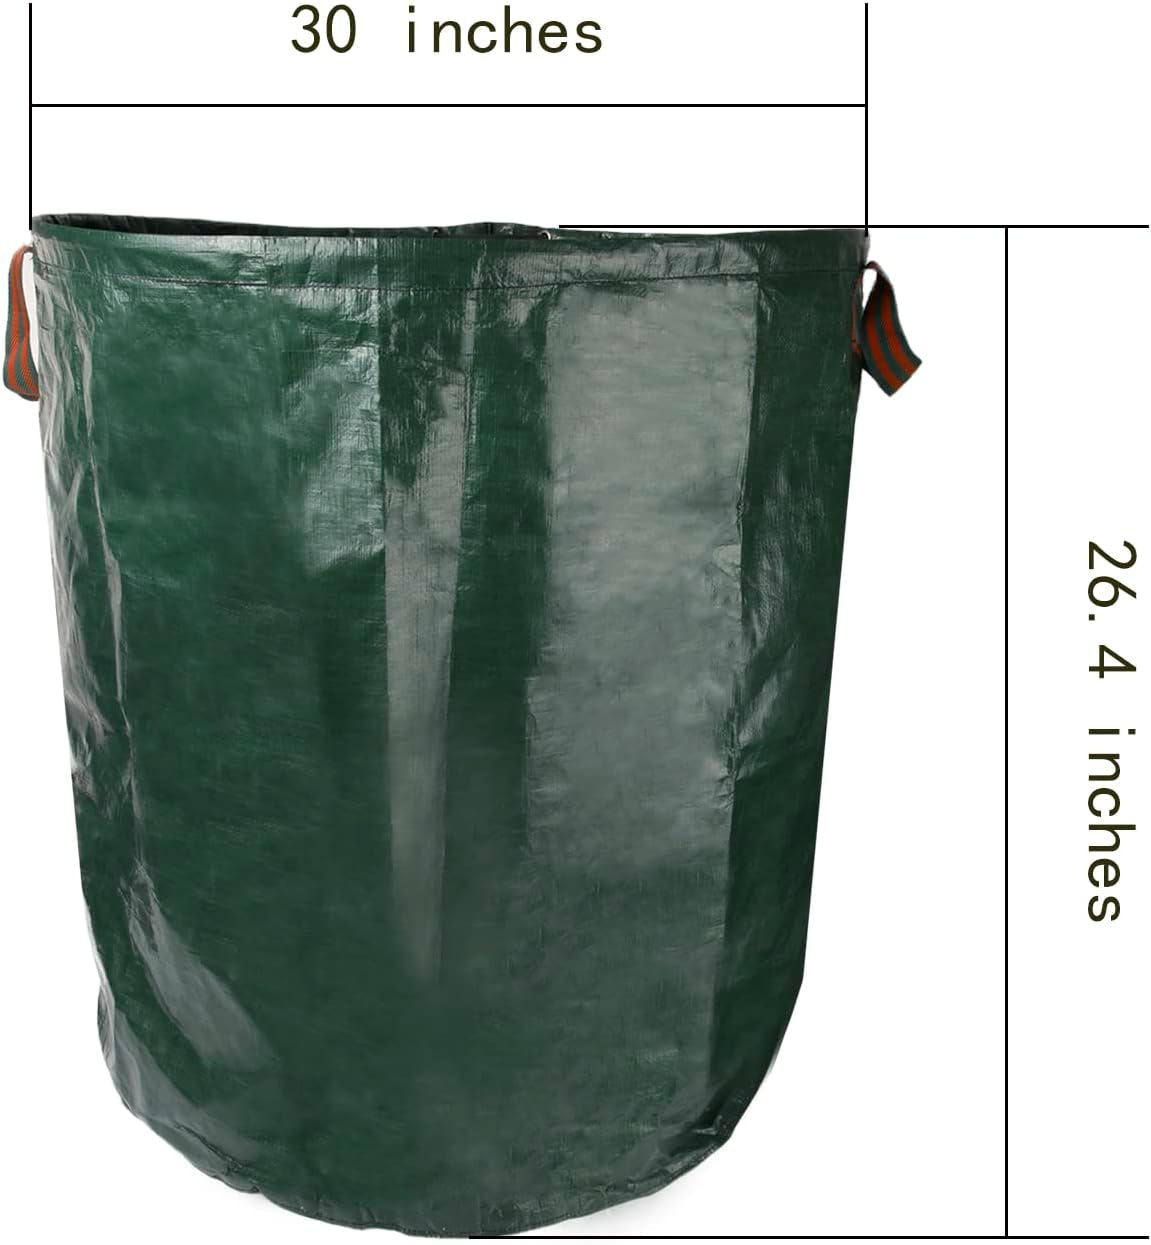 Garden Waste Bag - Heavy Duty Reusable Yard Waste Bags for Leaves, Grass Clippings, and Yard Debris